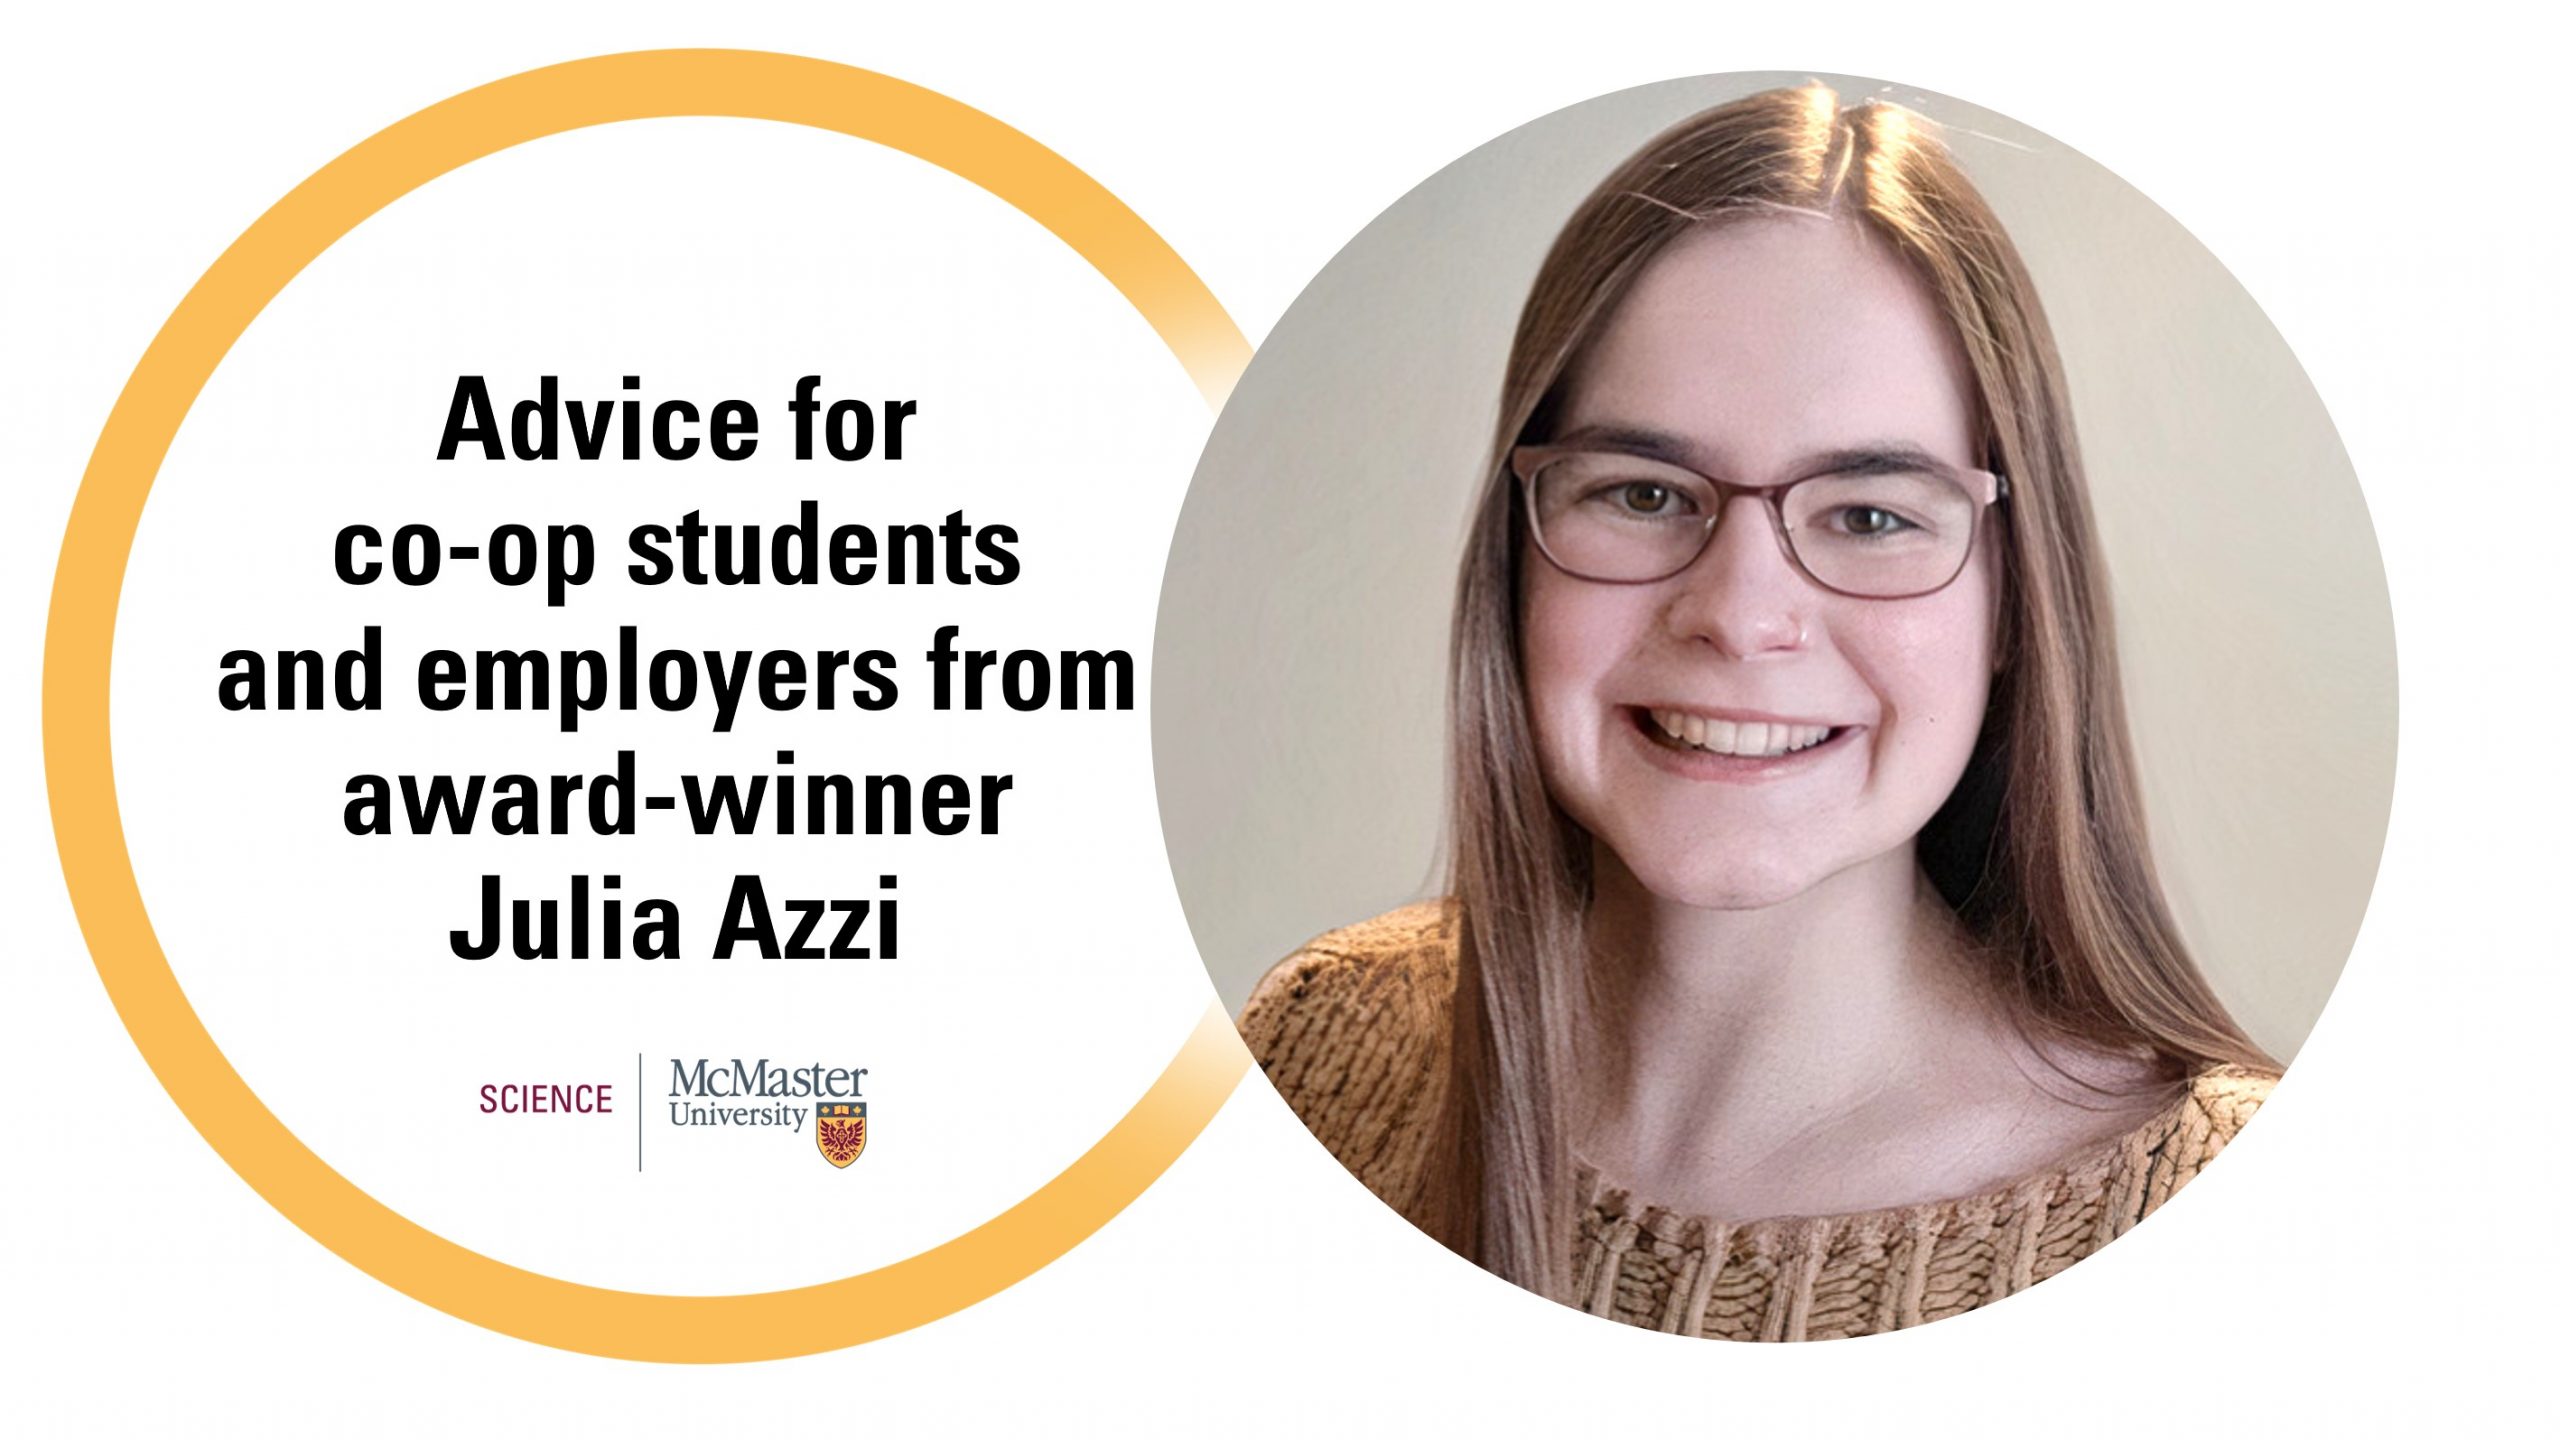 Advice for co-op students and employers from award-winner Julia Azzi